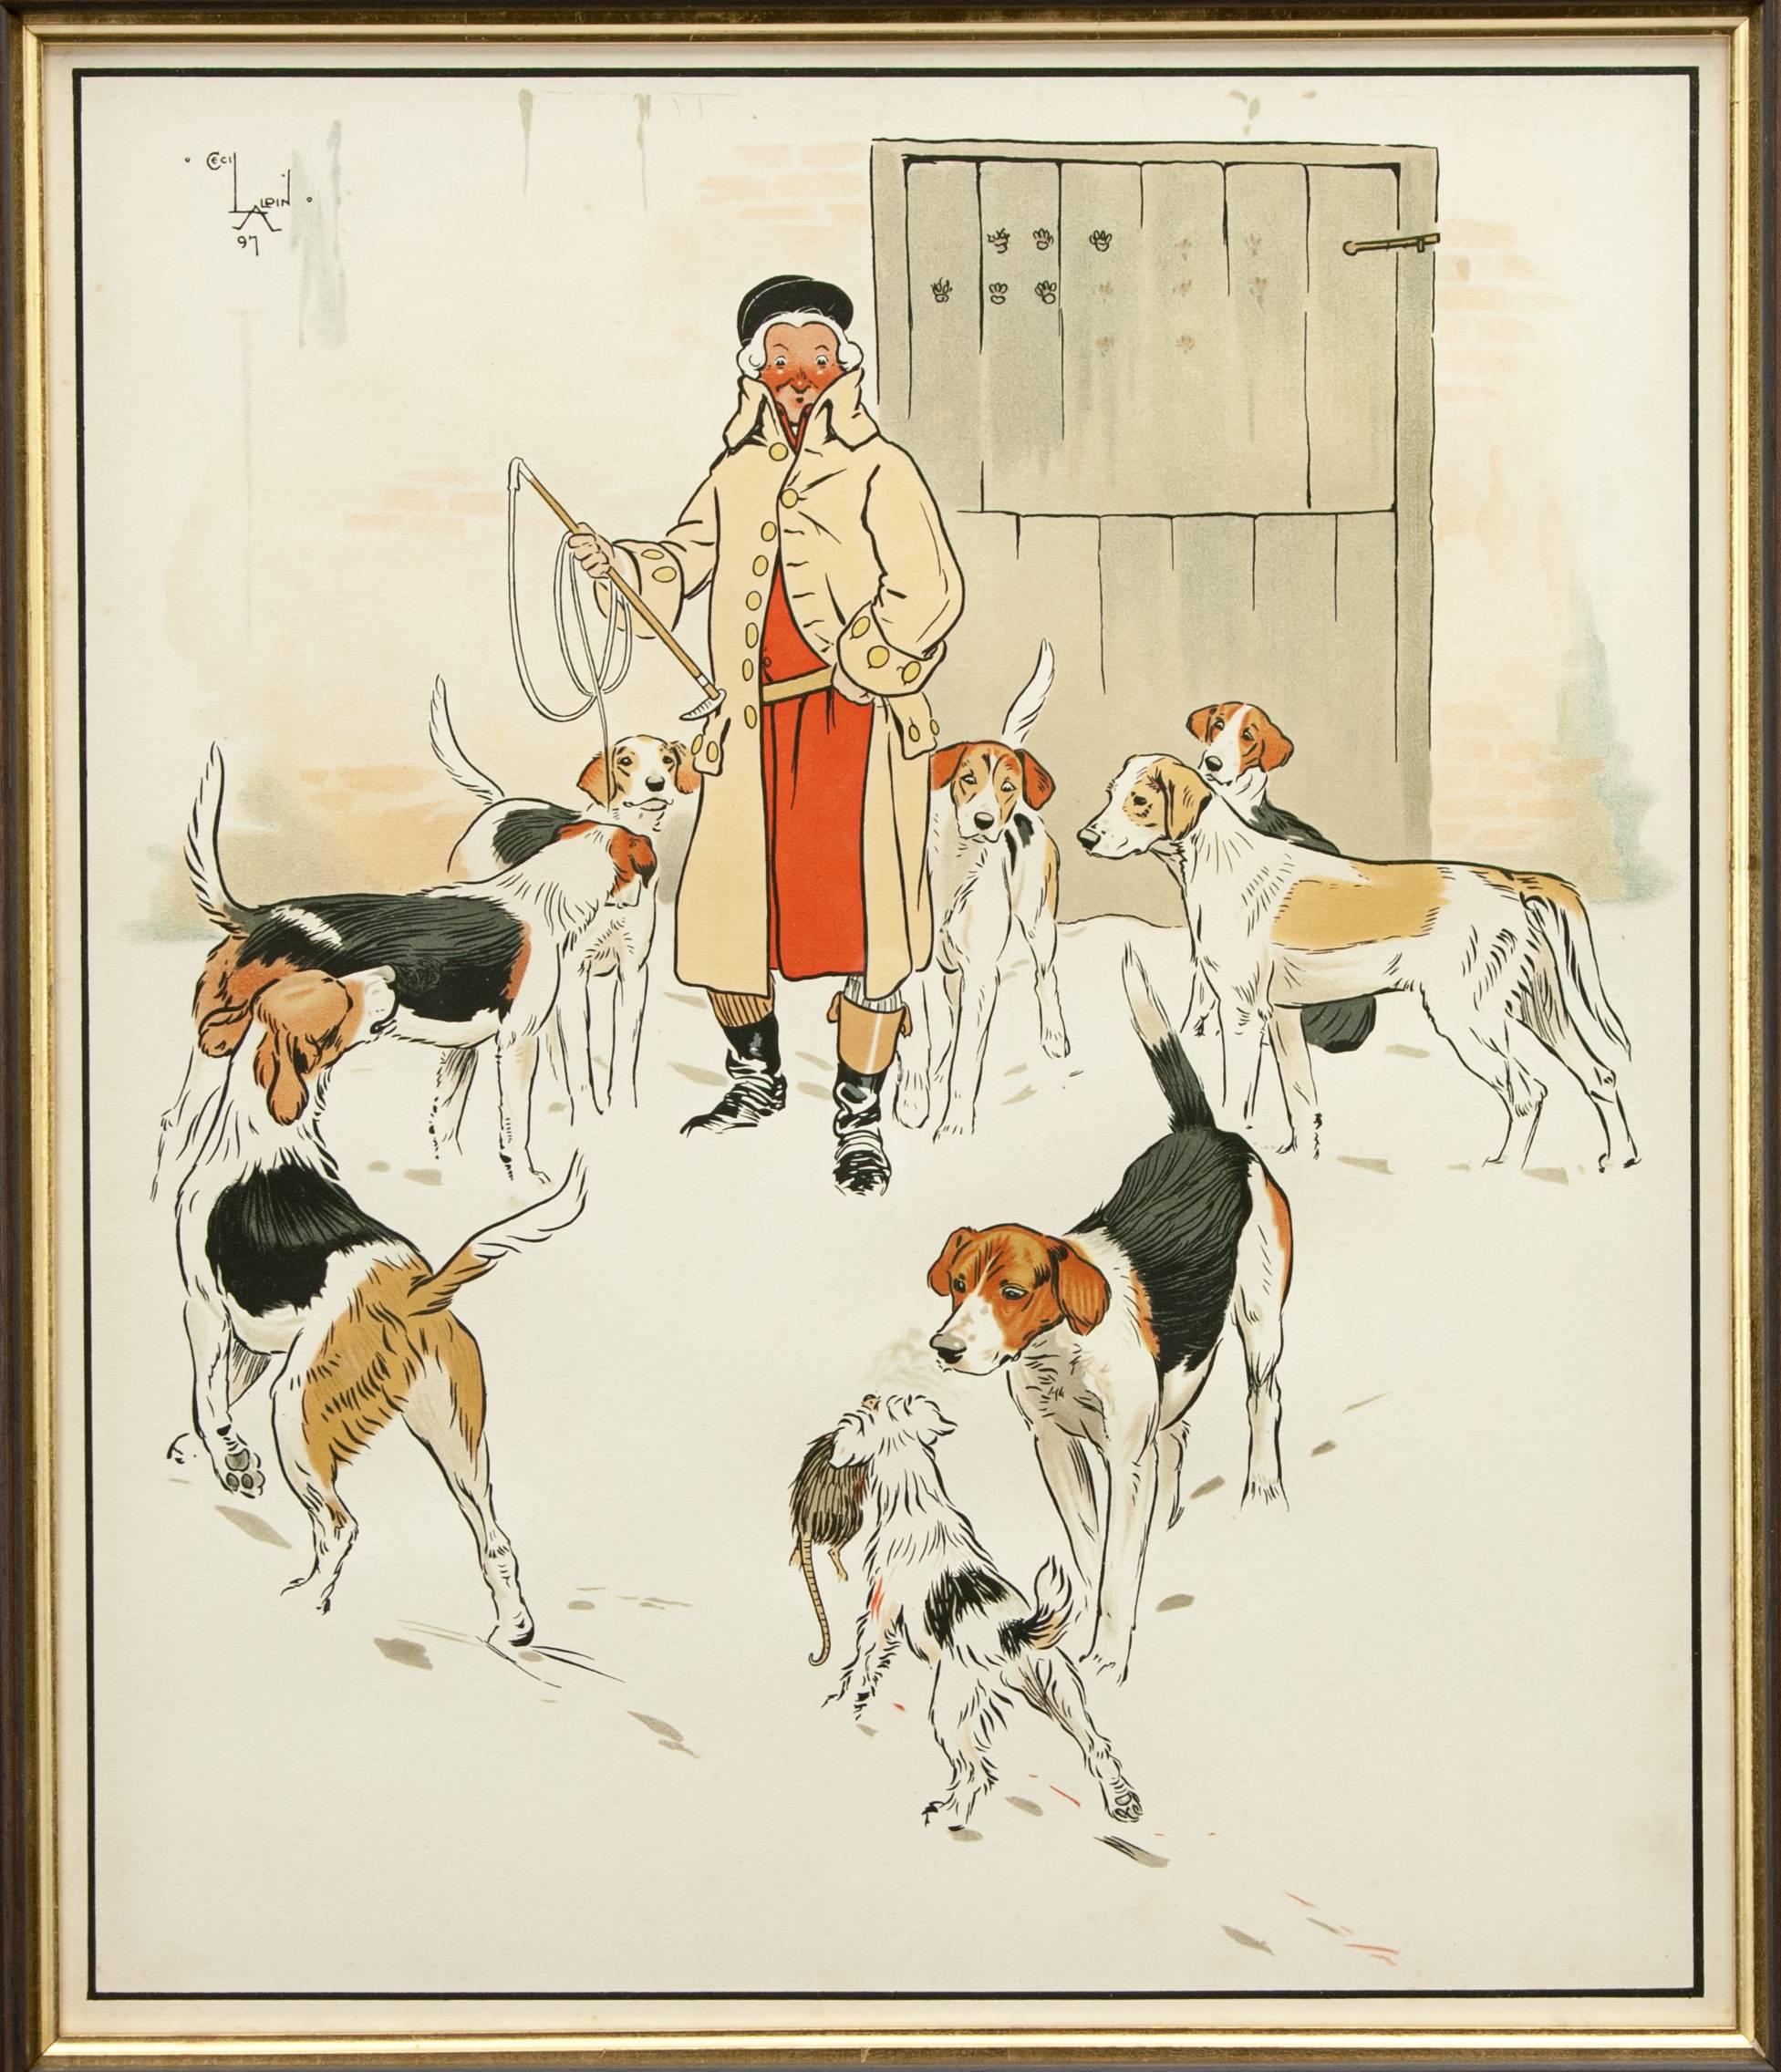 Every Dog Has His Day, Cecil Aldin
Humours hunting print by Cecil Aldin 'Every Dog Has His Day'. A great chromolithograph in a new wooden frame but retaining the original ivorine title label. Image shows a little dog walking amongst the hunting